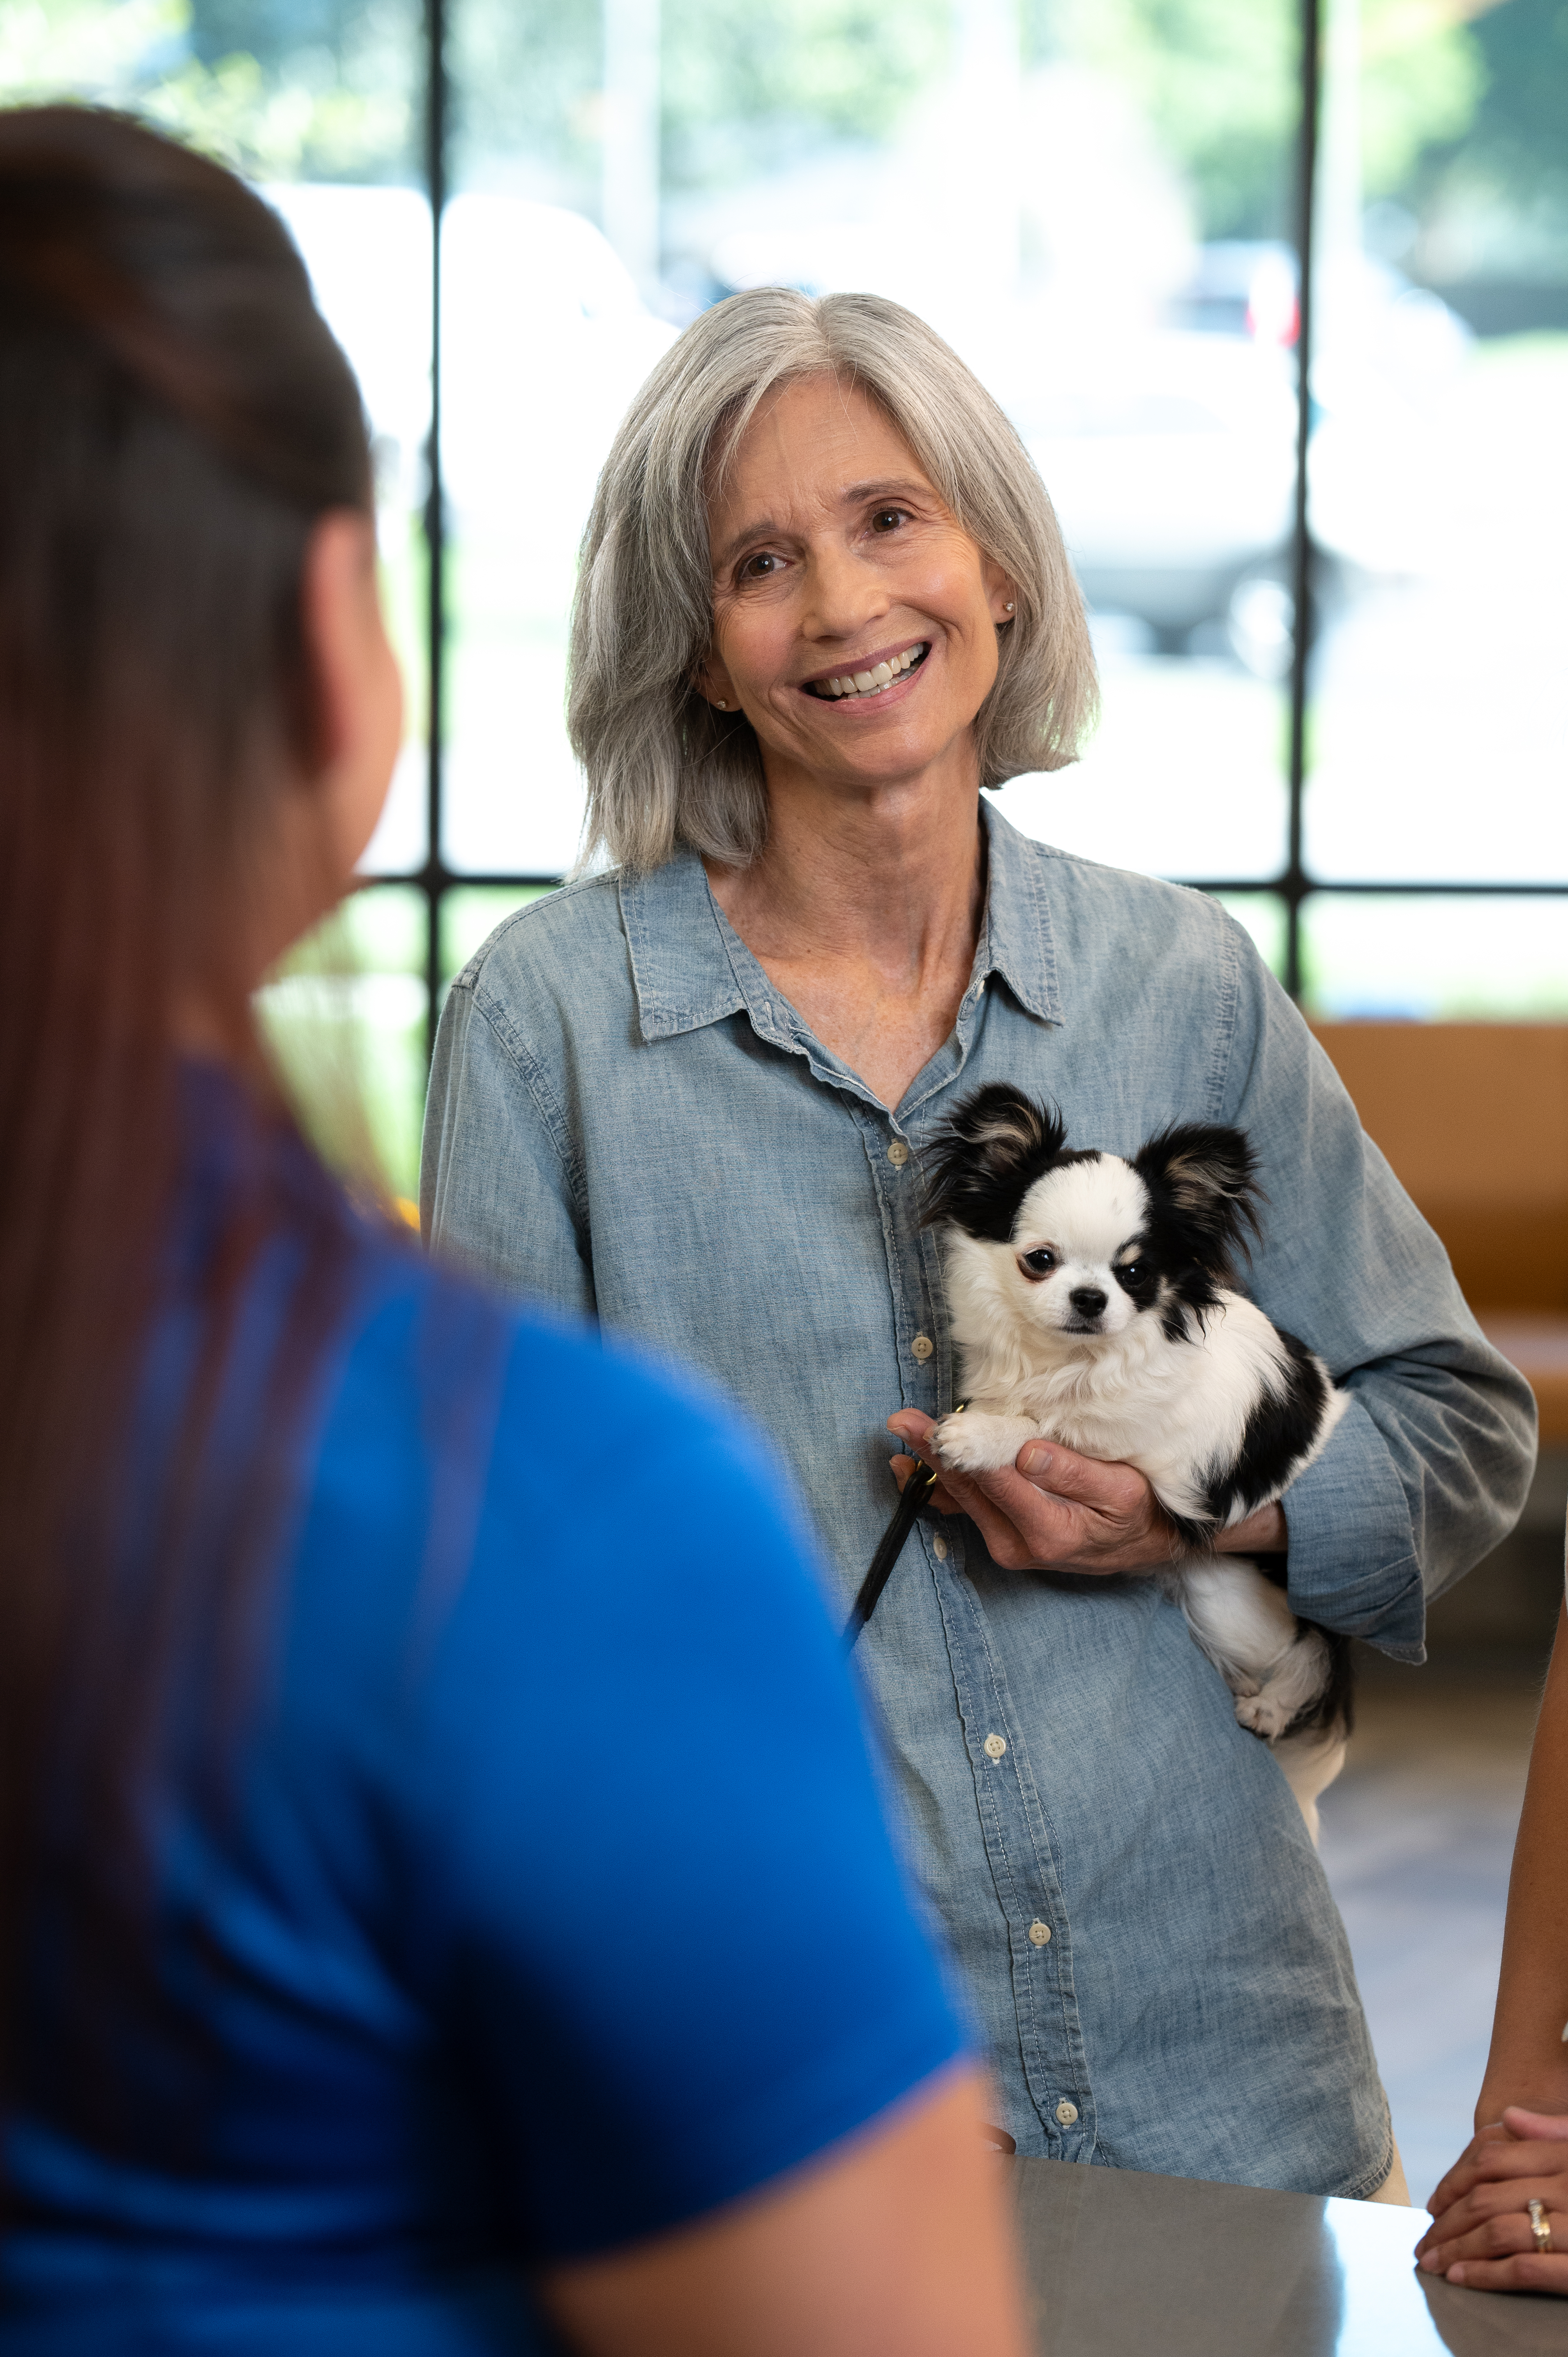 A woman smiles at another woman while holding a small dog in her arms.